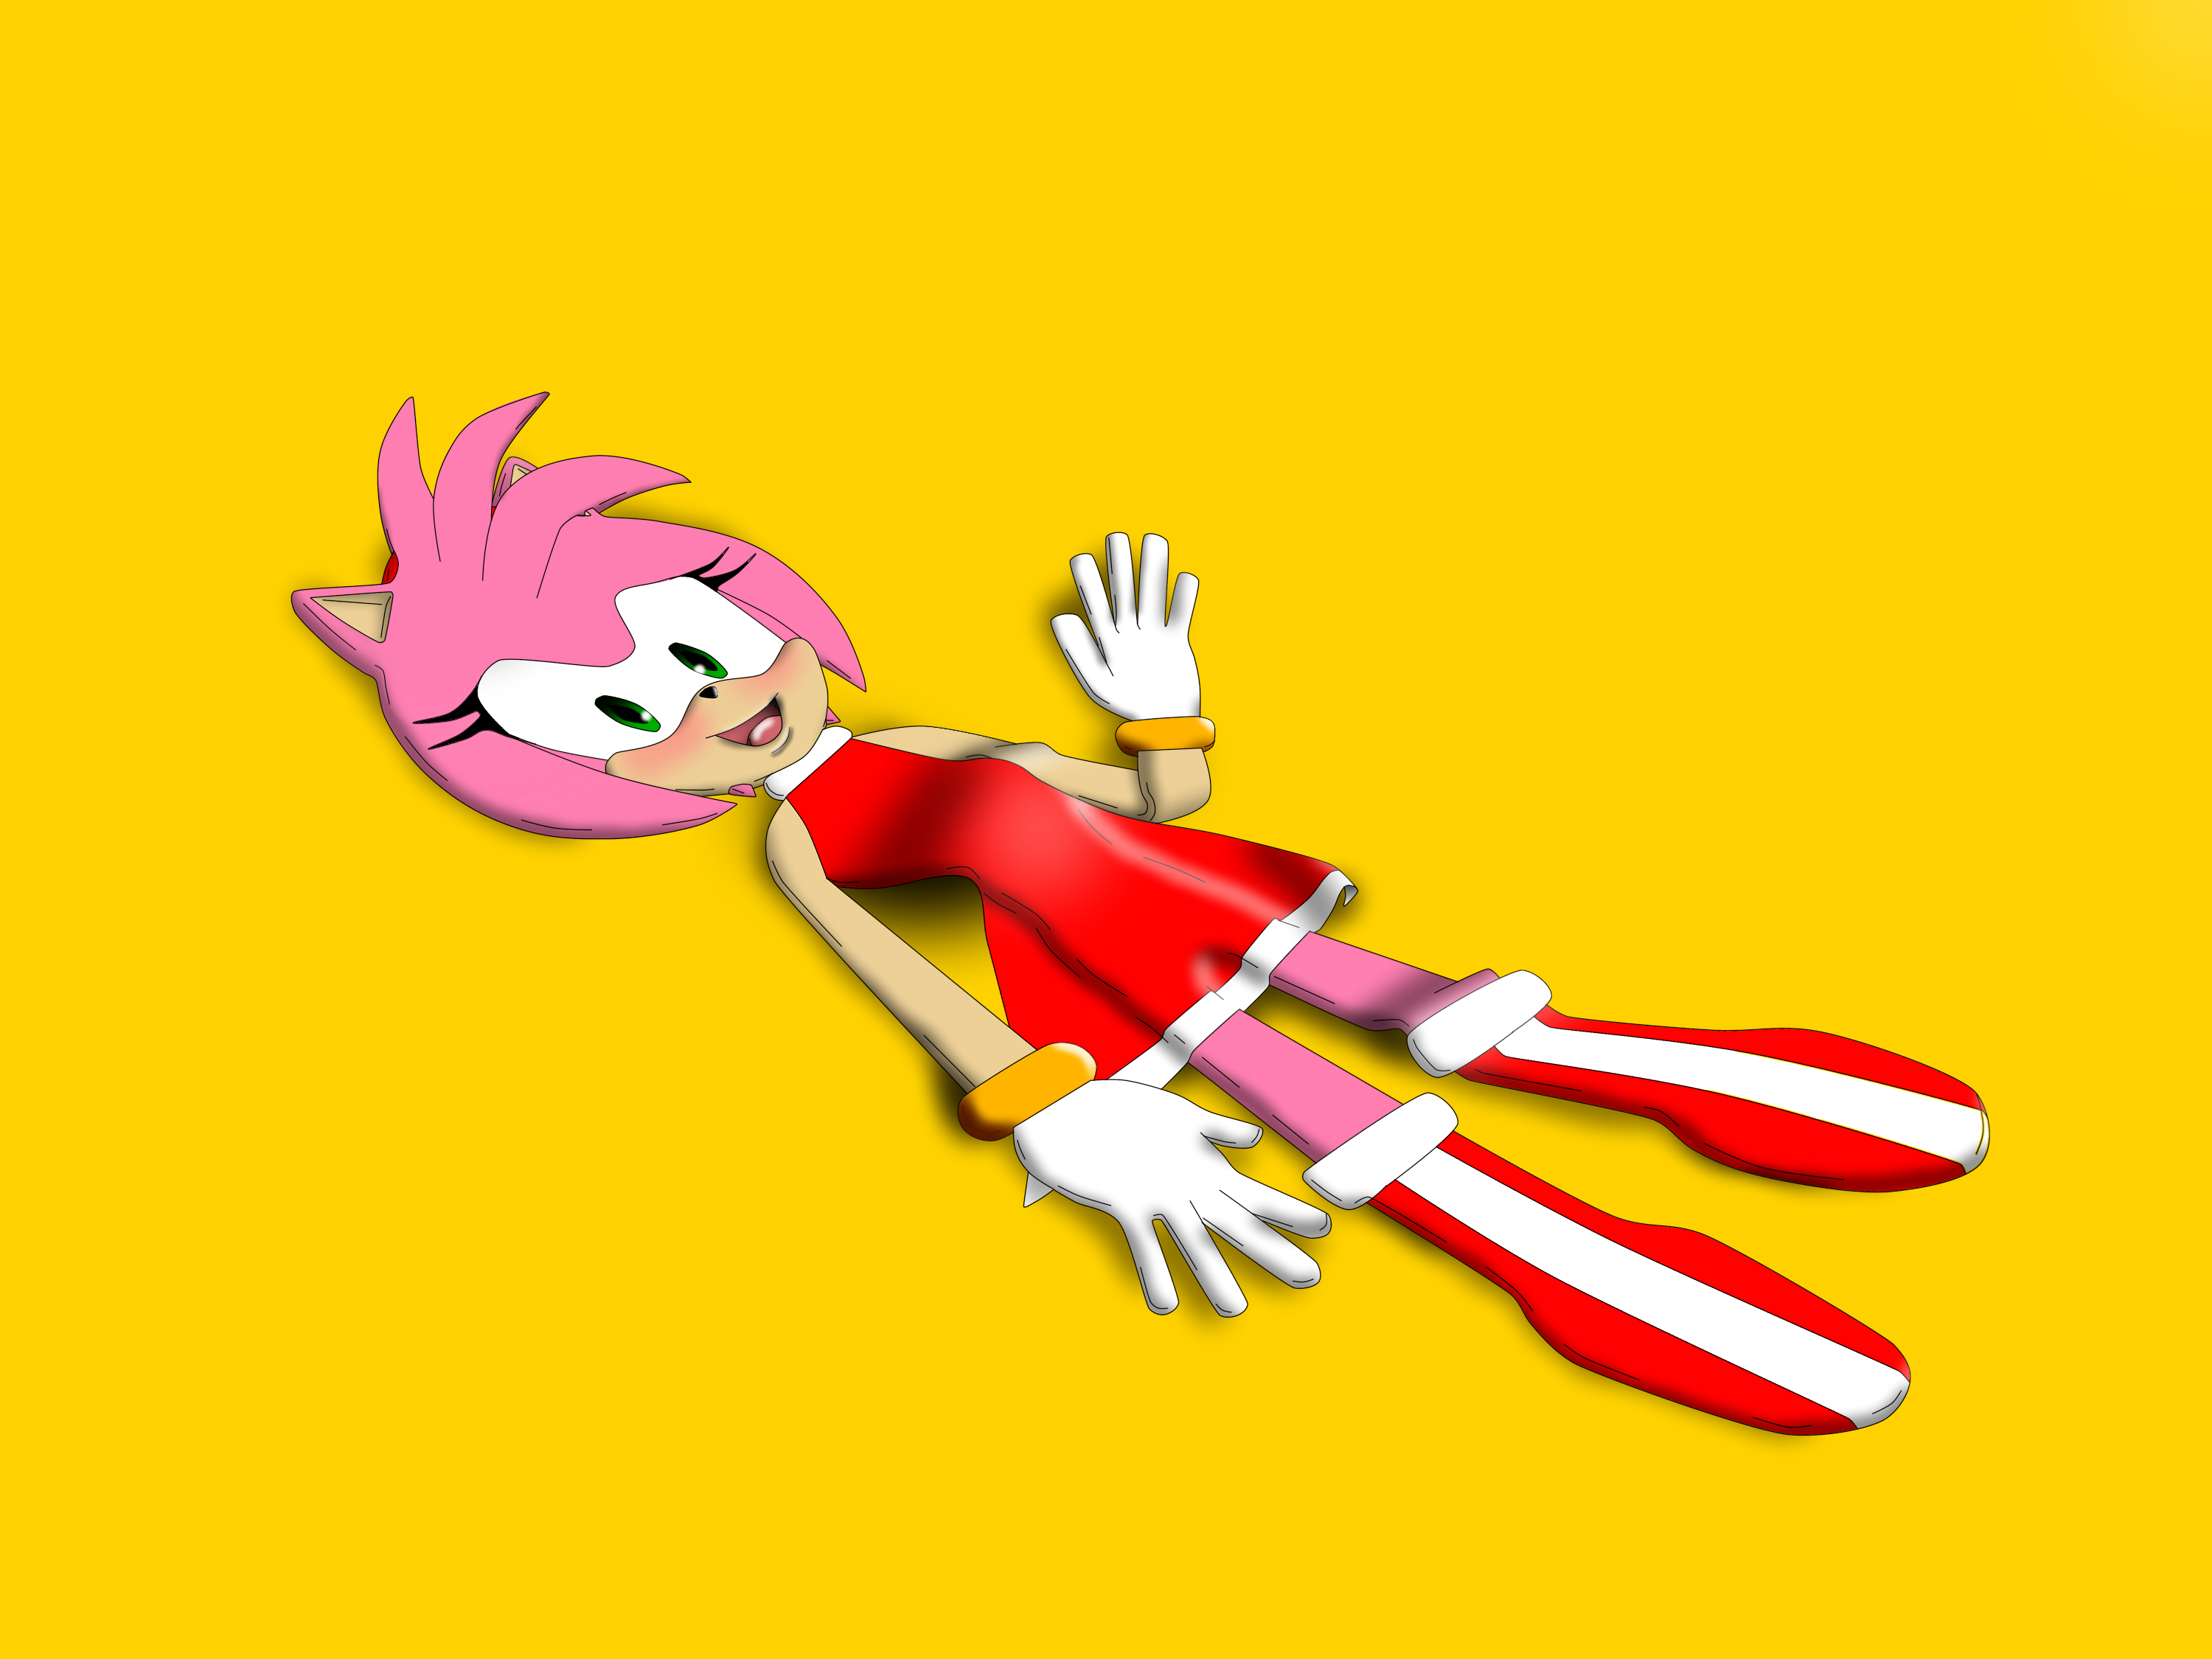 Request from: TehMaster001 - Flattened Amy